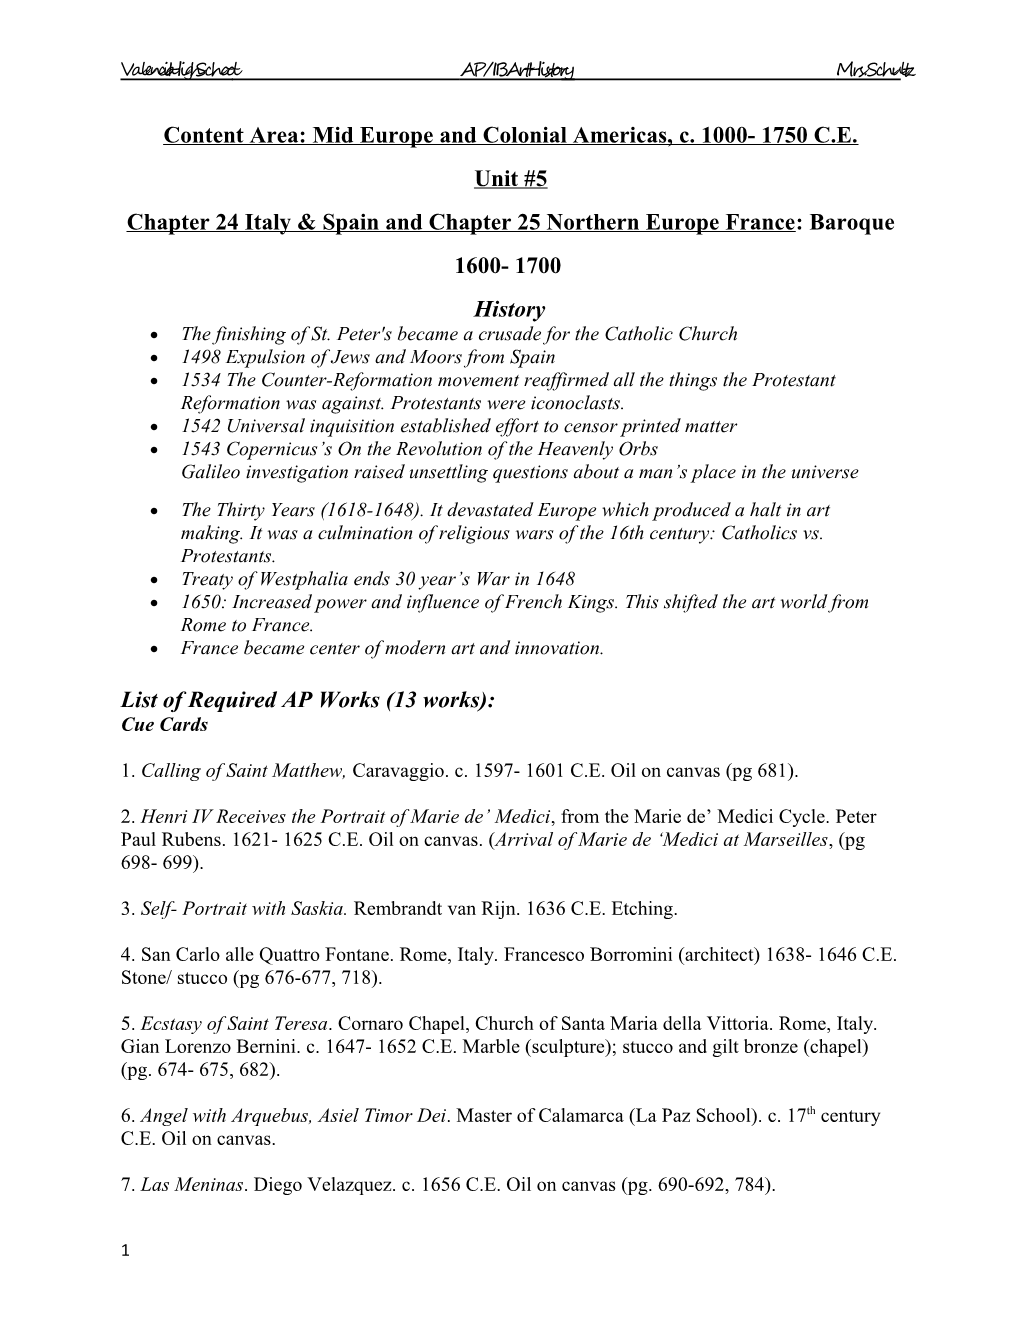 Content Area: Mid Europe and Colonial Americas, C. 1000- 1750 C.E